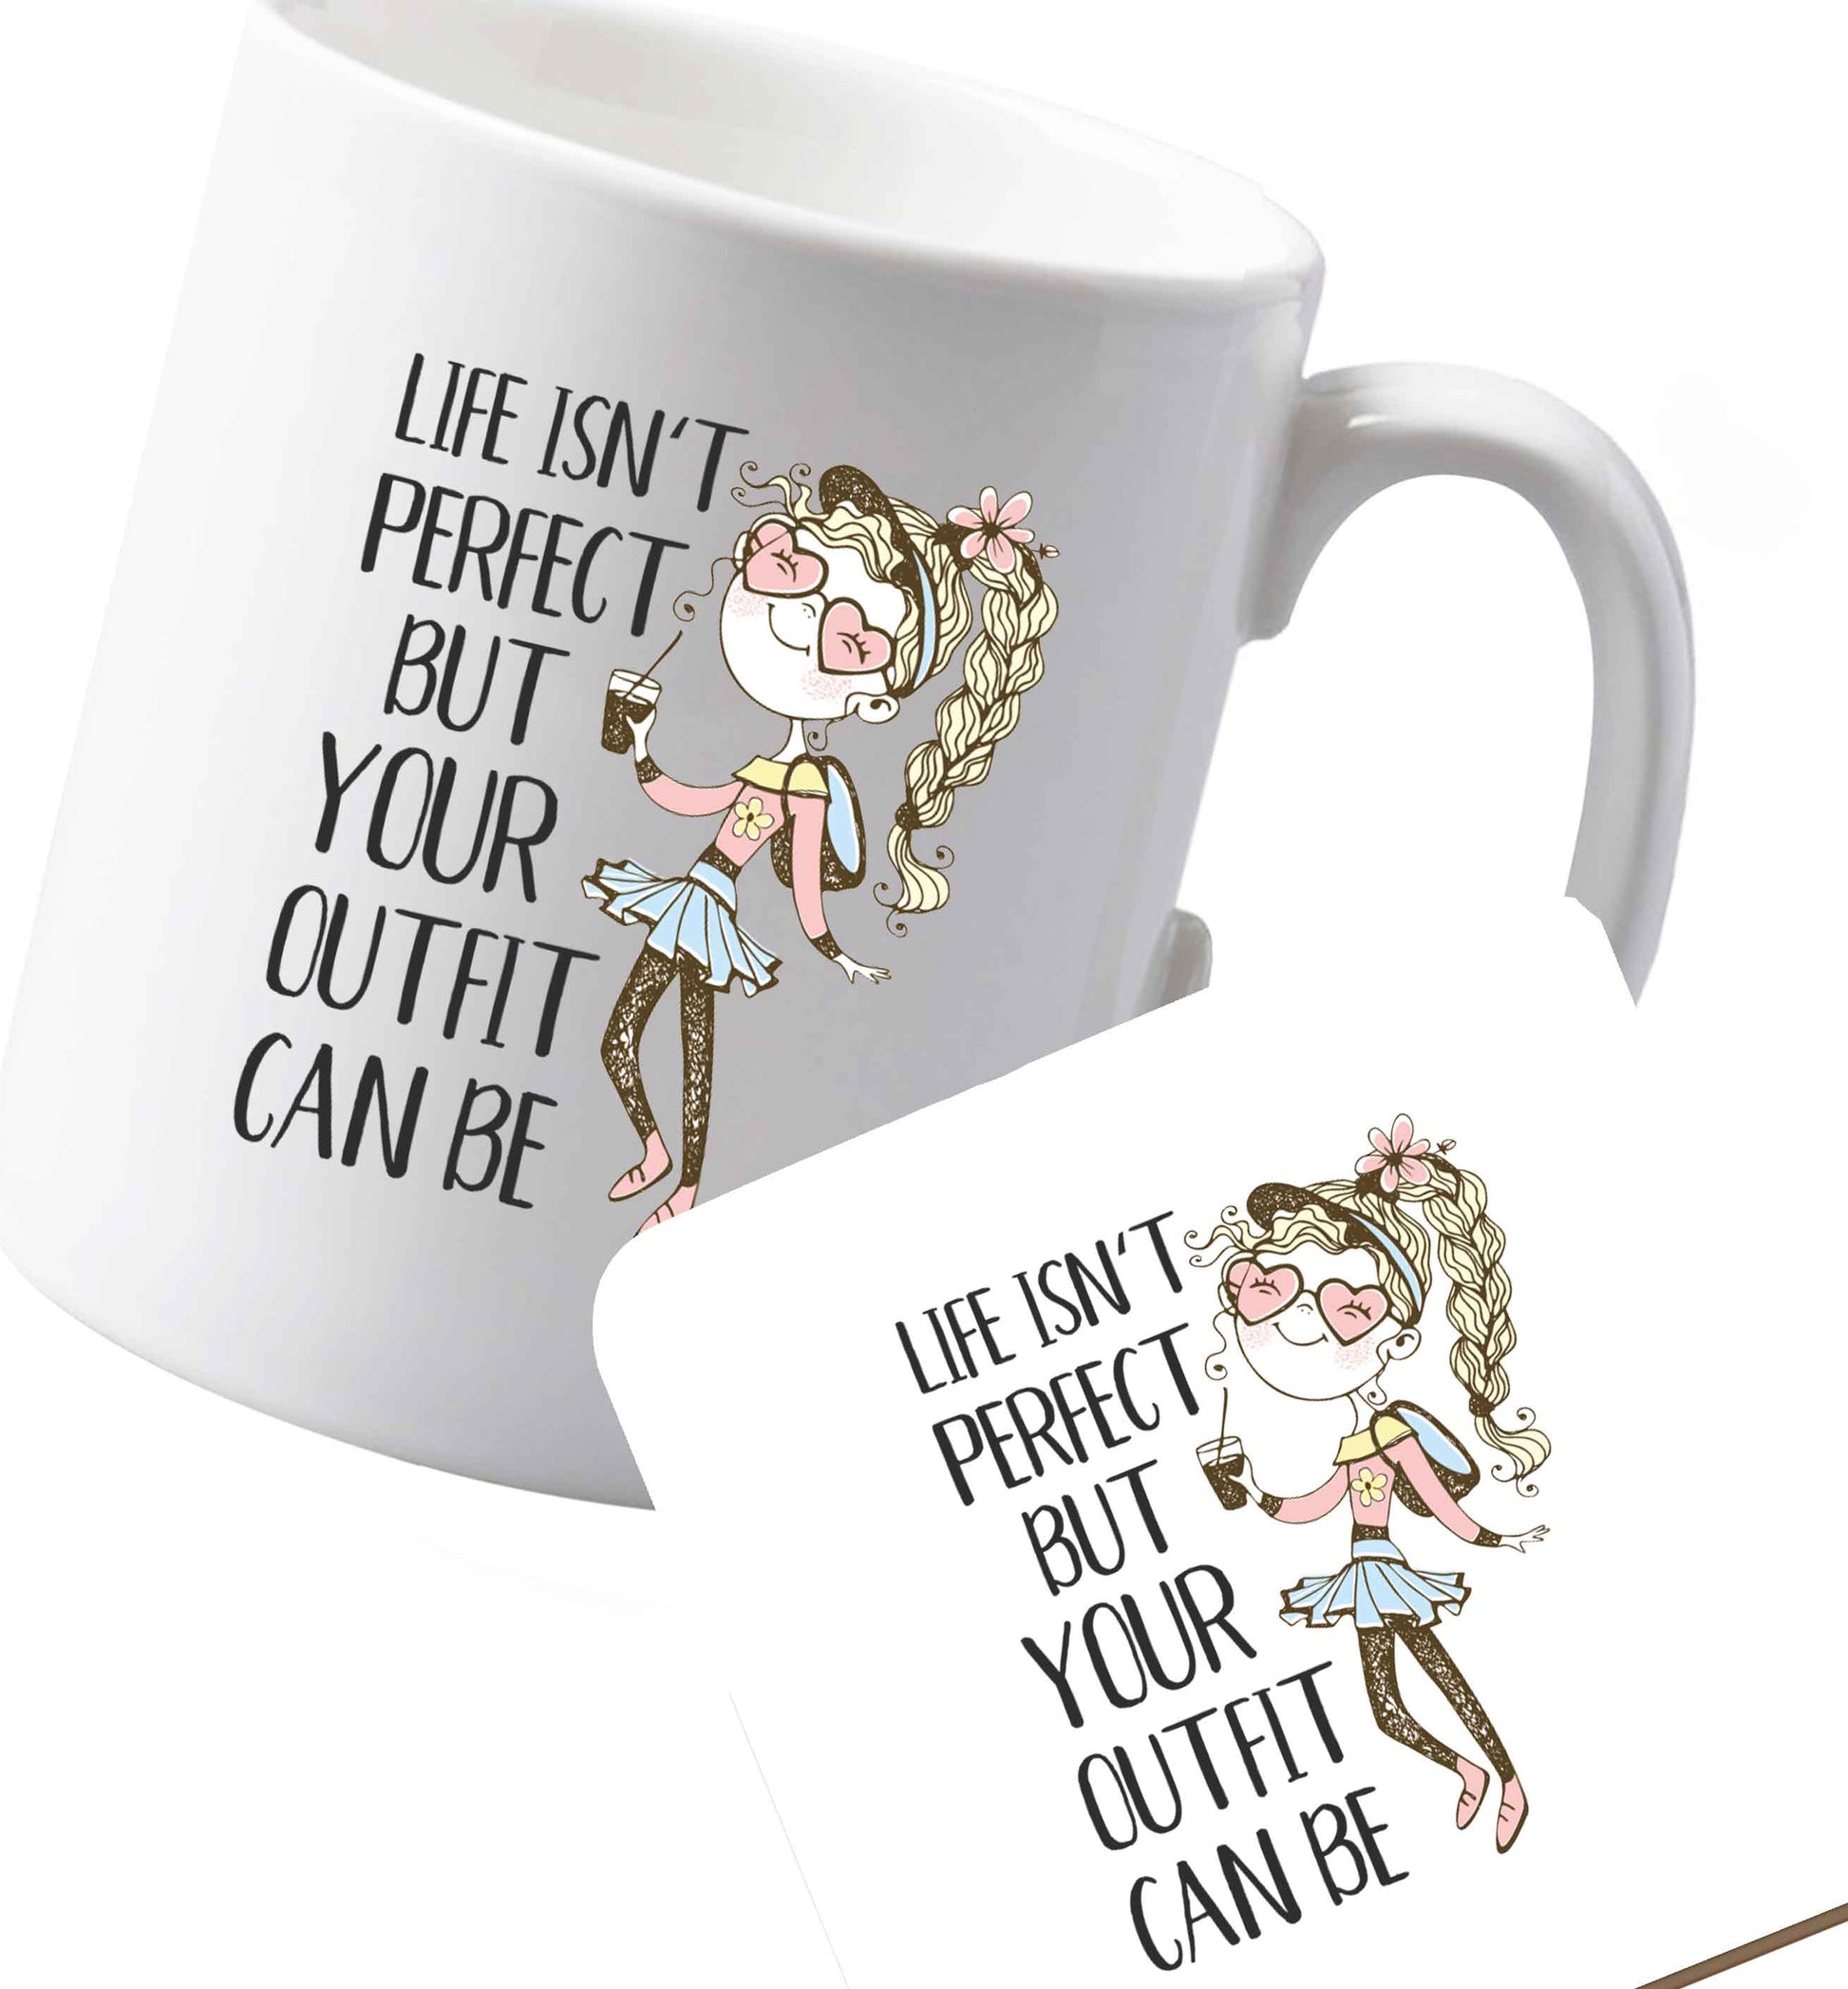 10 oz Ceramic mug and coaster Life isn't perfect but your outfit can be illustration  both sides